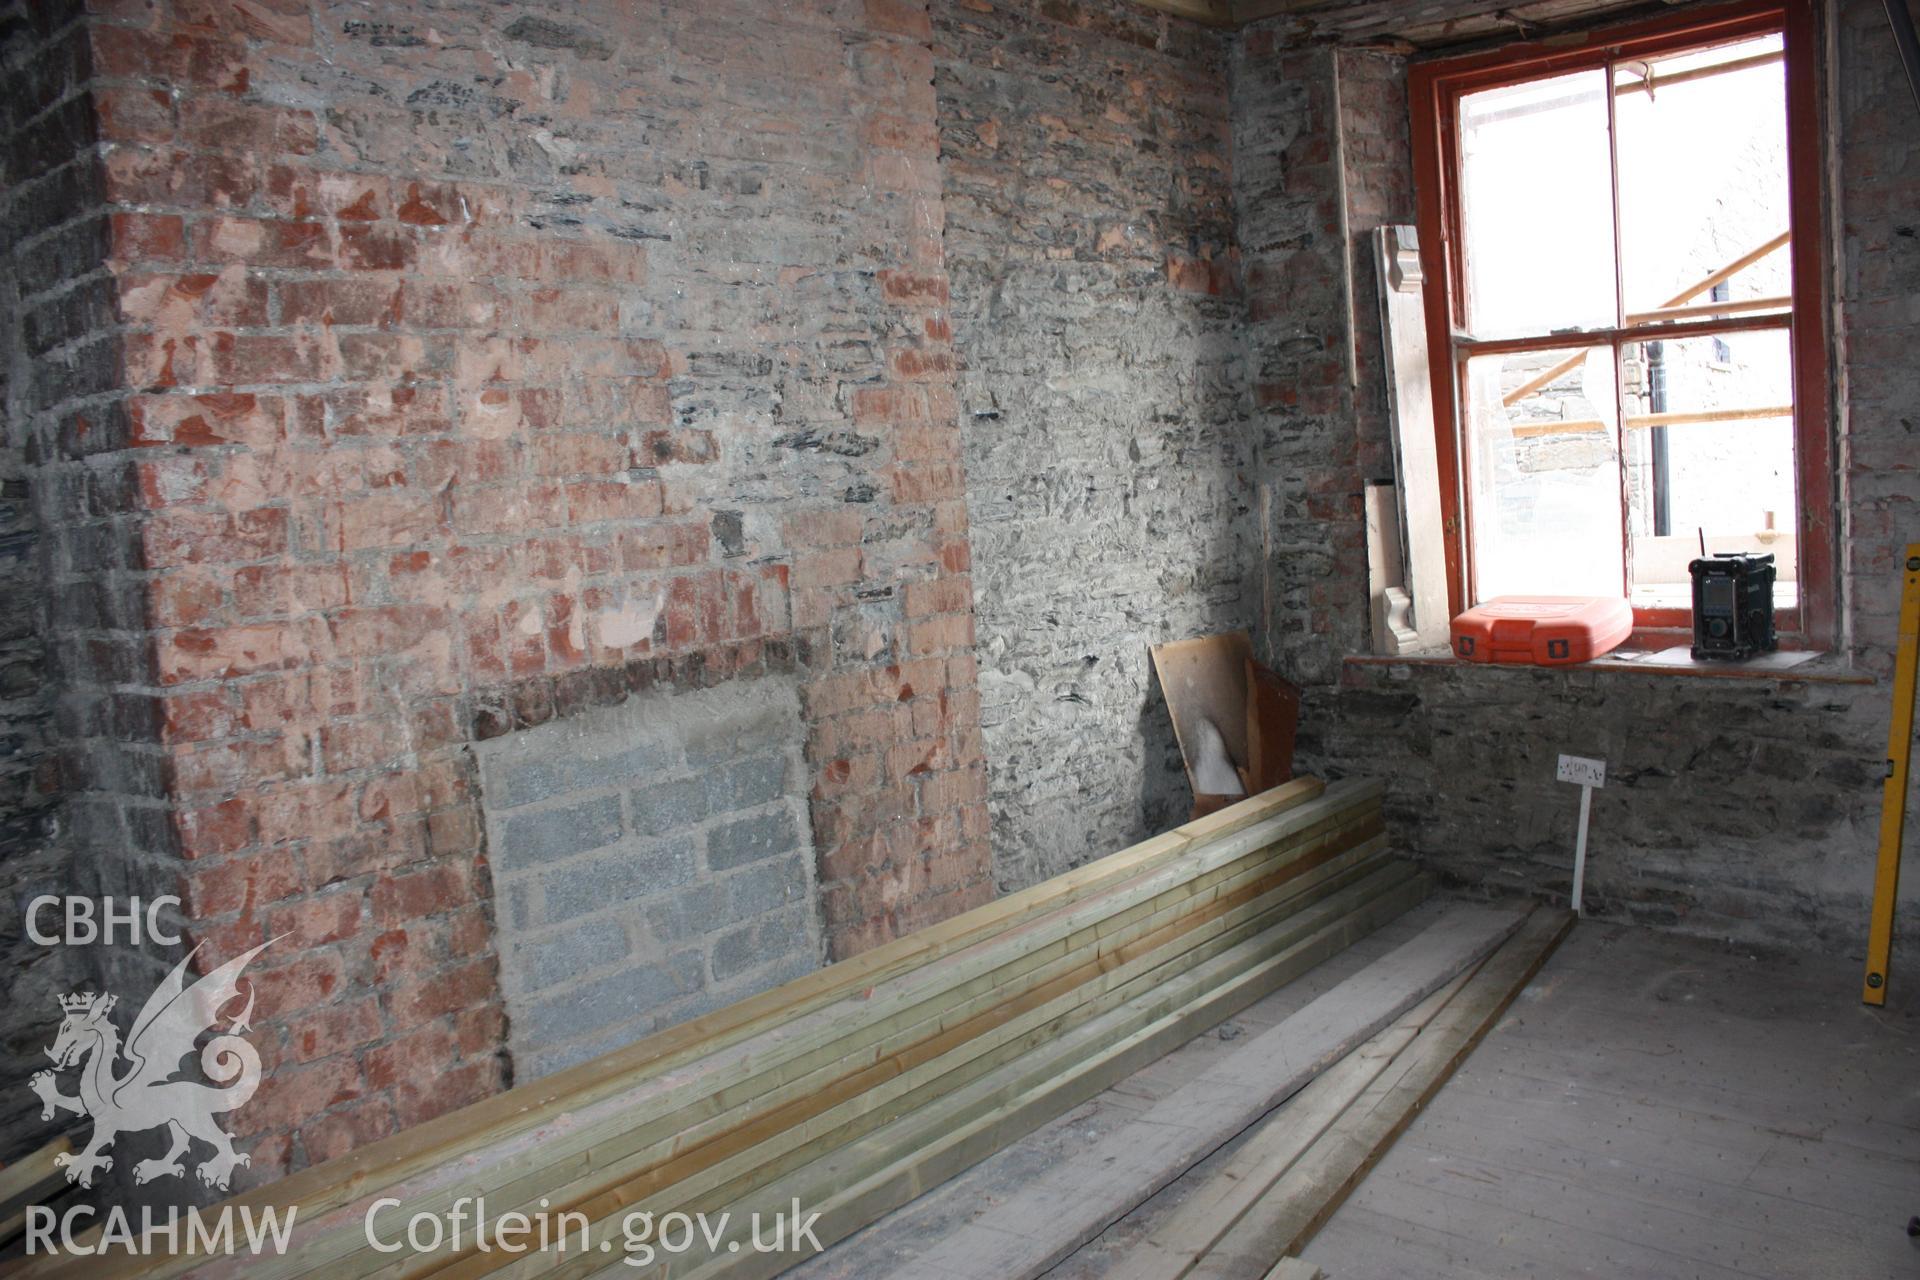 Colour photograph showing interior view of bricked up fireplace at the Old Auction Rooms/ Liberal Club in Aberystwyth. Photographic survey conducted by Geoff Ward on 9th June 2010 during repair work prior to conversion into flats.